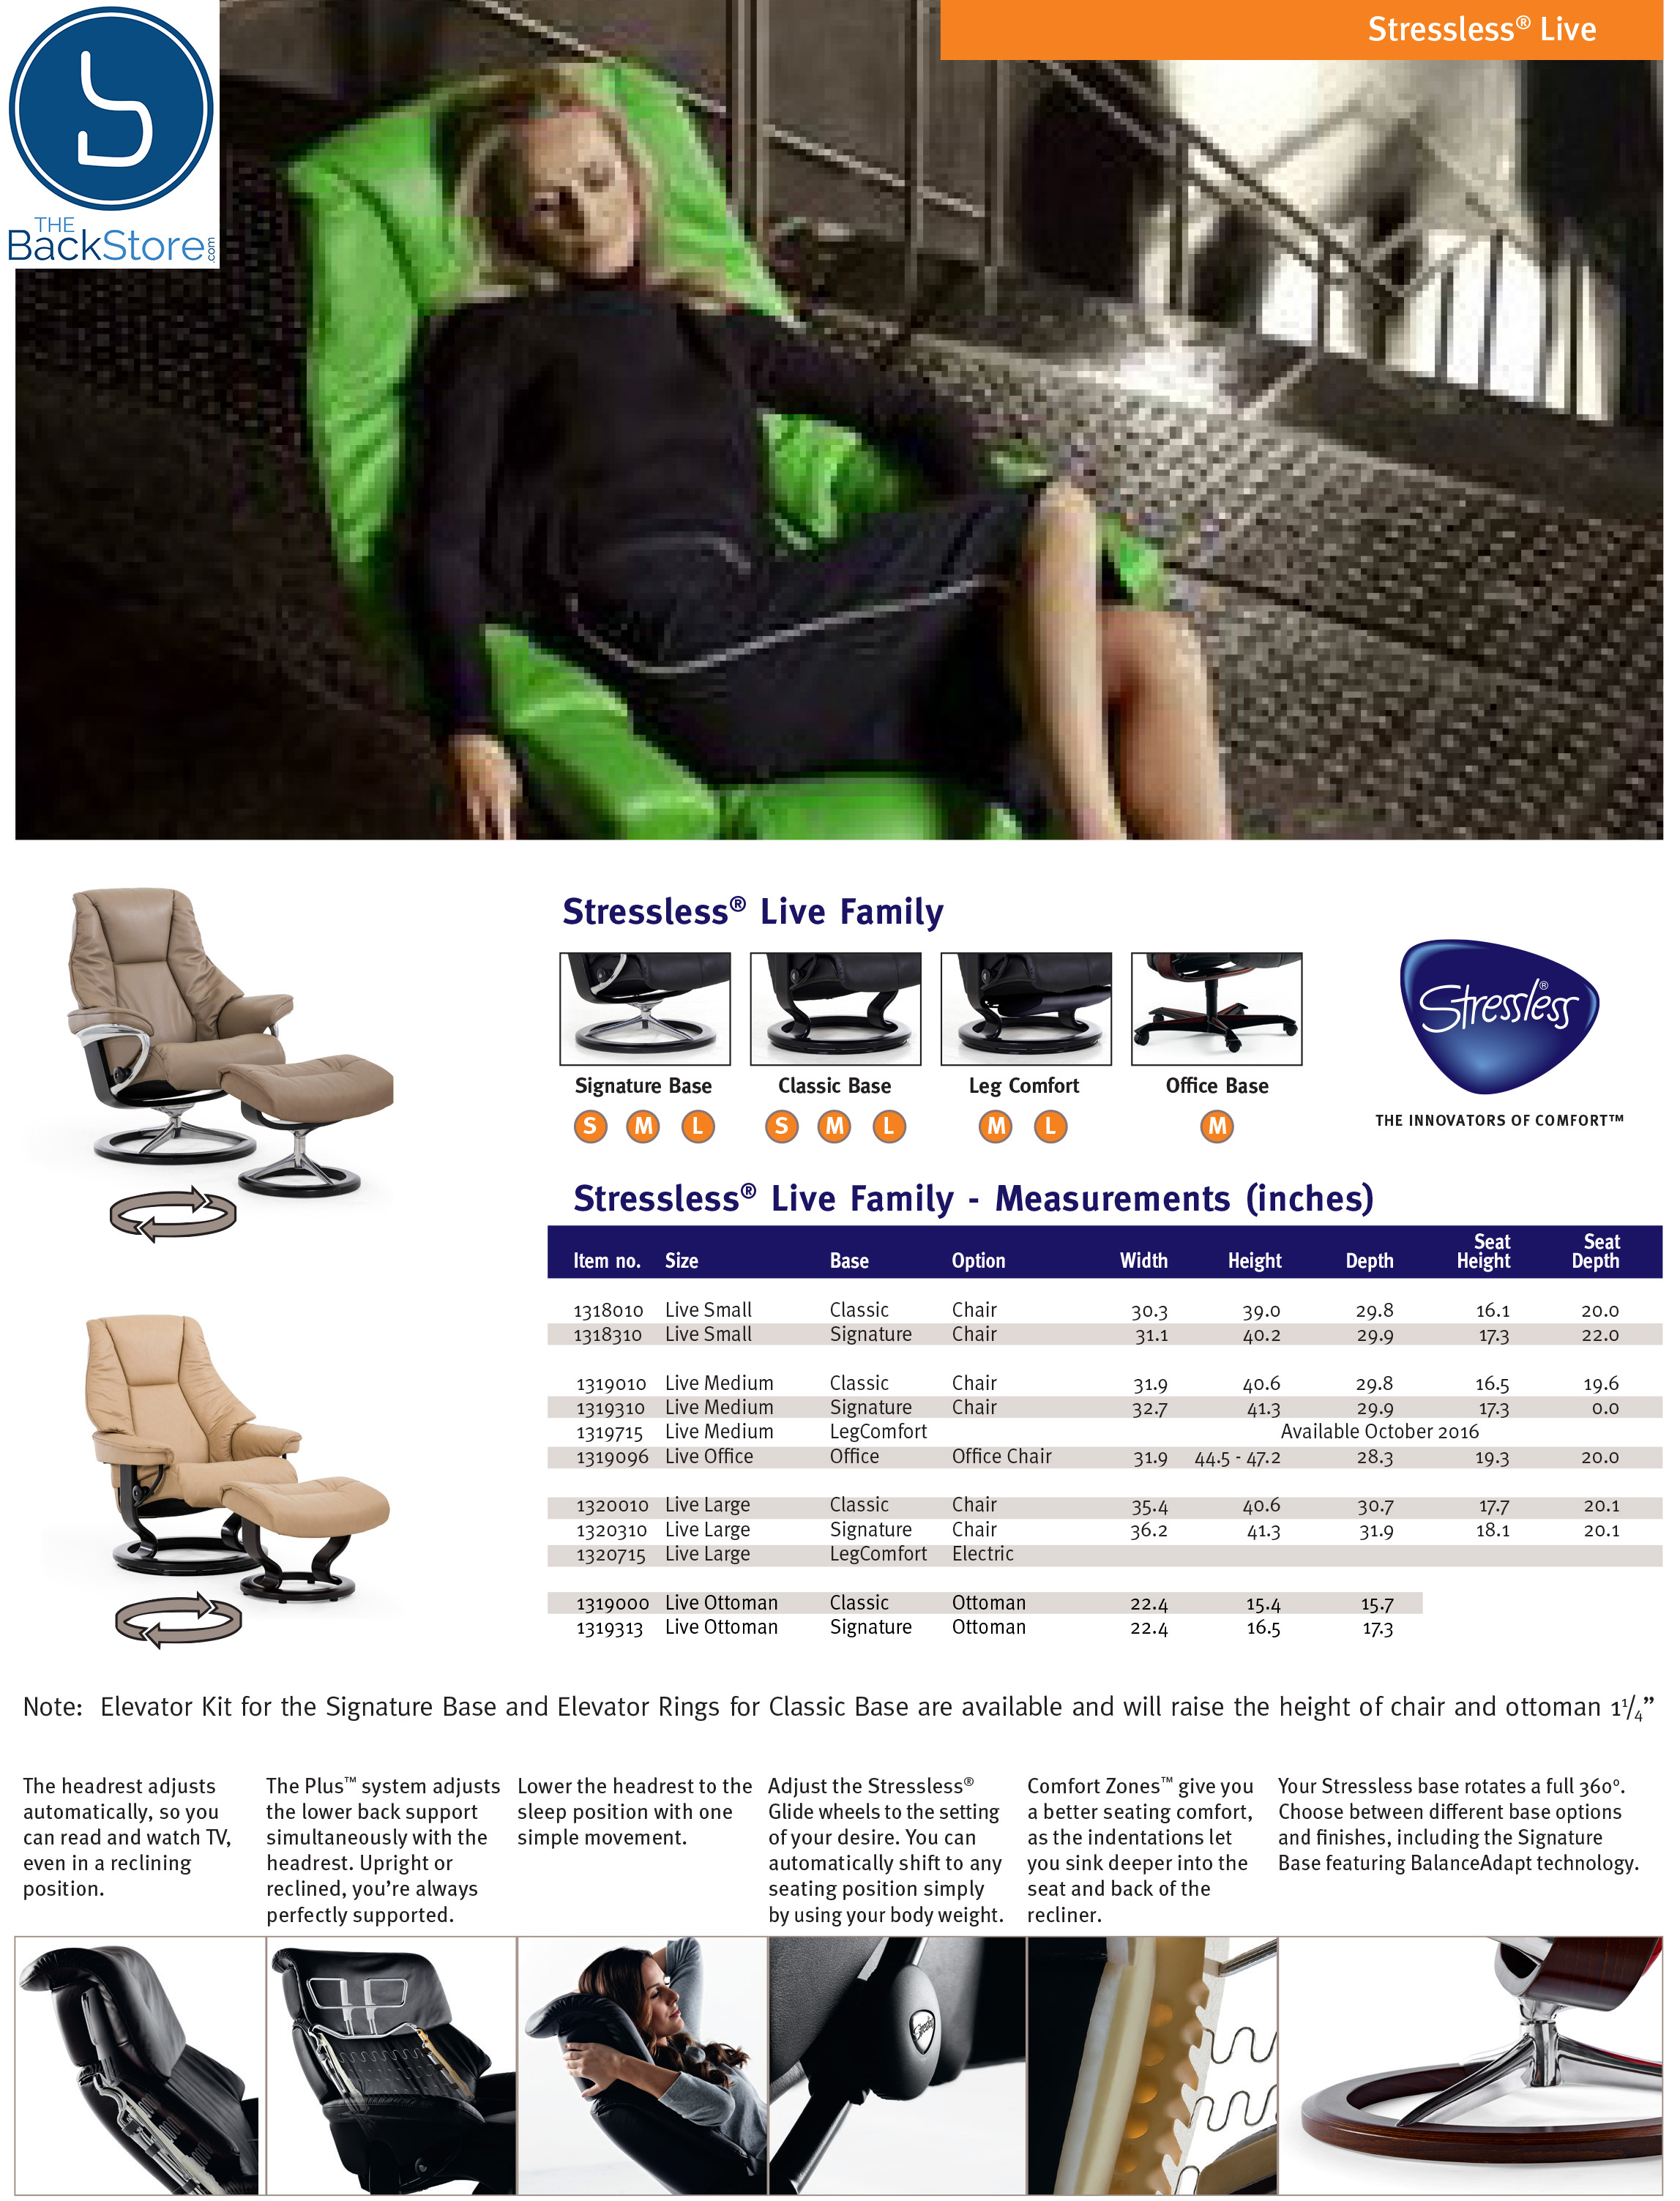 The Lowly Footrest - PainFree Living: LIFEFORM® Chairs